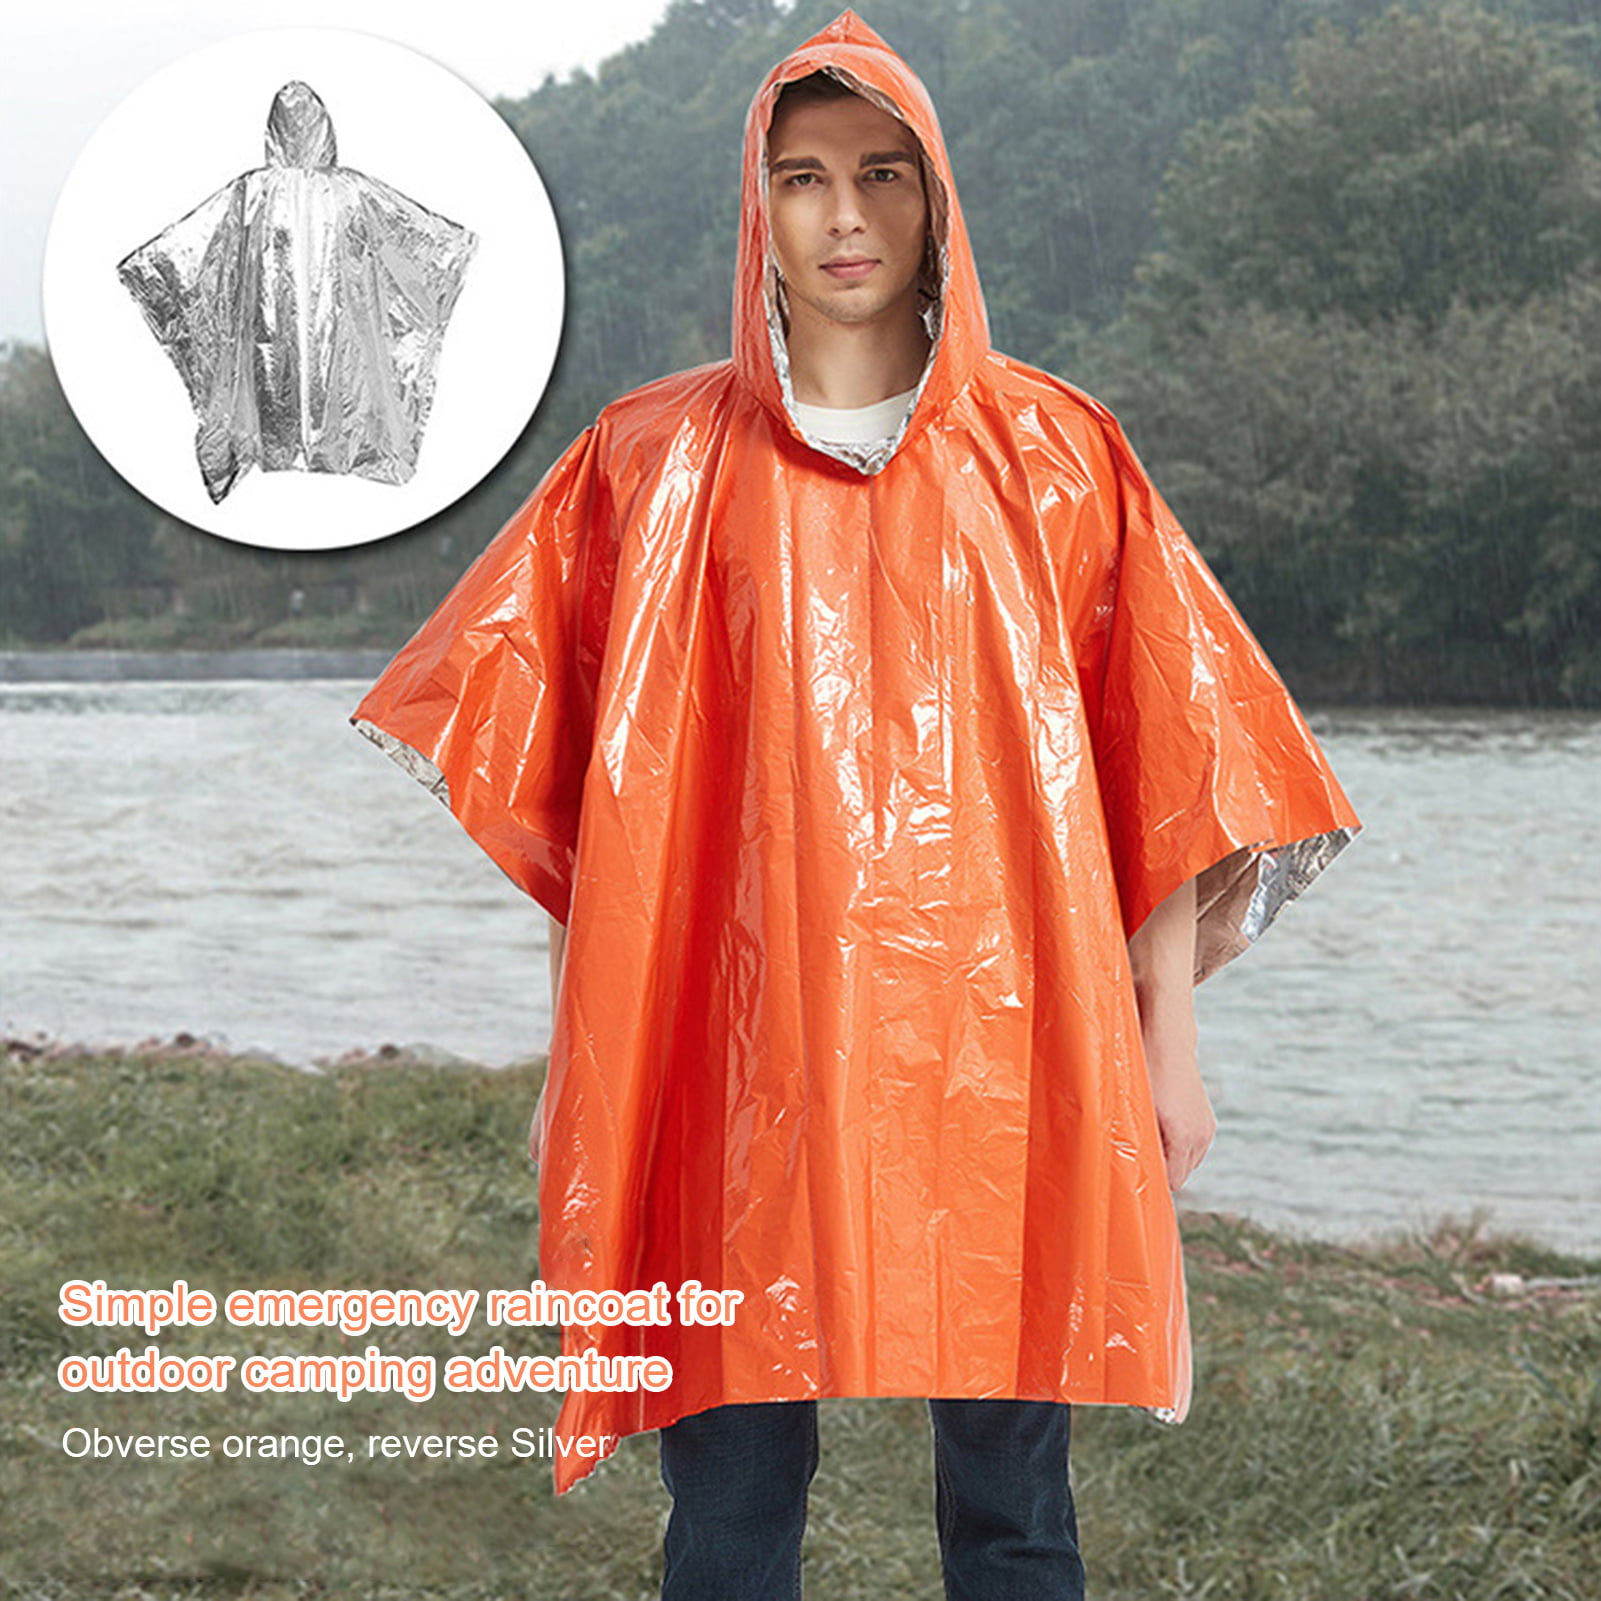 Survival Gear and Equipment for Outdoor Activity Odoland Emergency Blanket Poncho 3 Packs Thermal Emergency Raincoats Keep Dry and Warm Blankets 